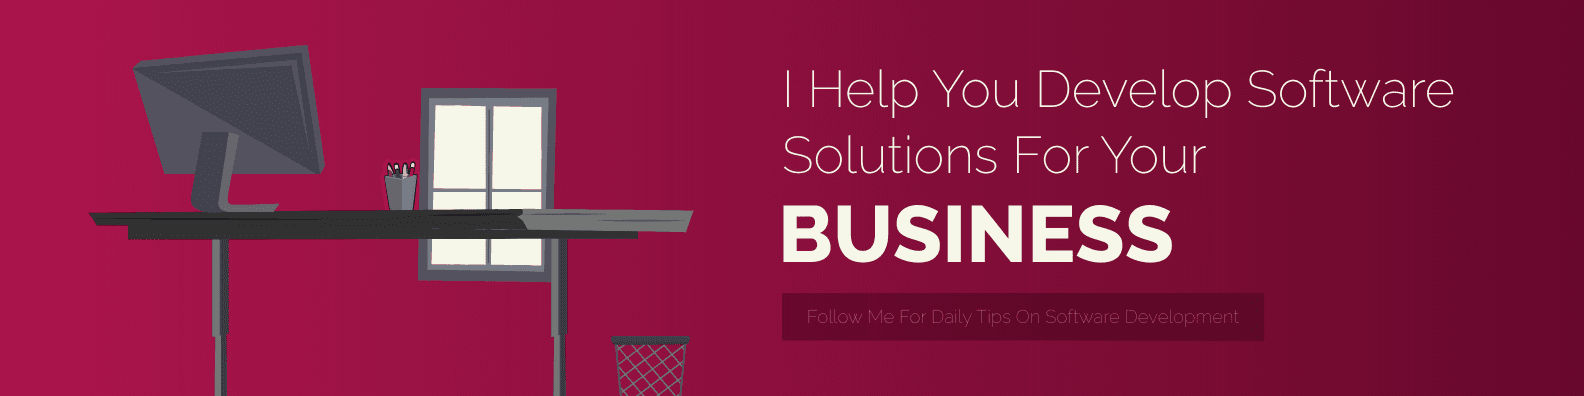 business-solutions-and-tips-linkedin-banner-thumbnail-img